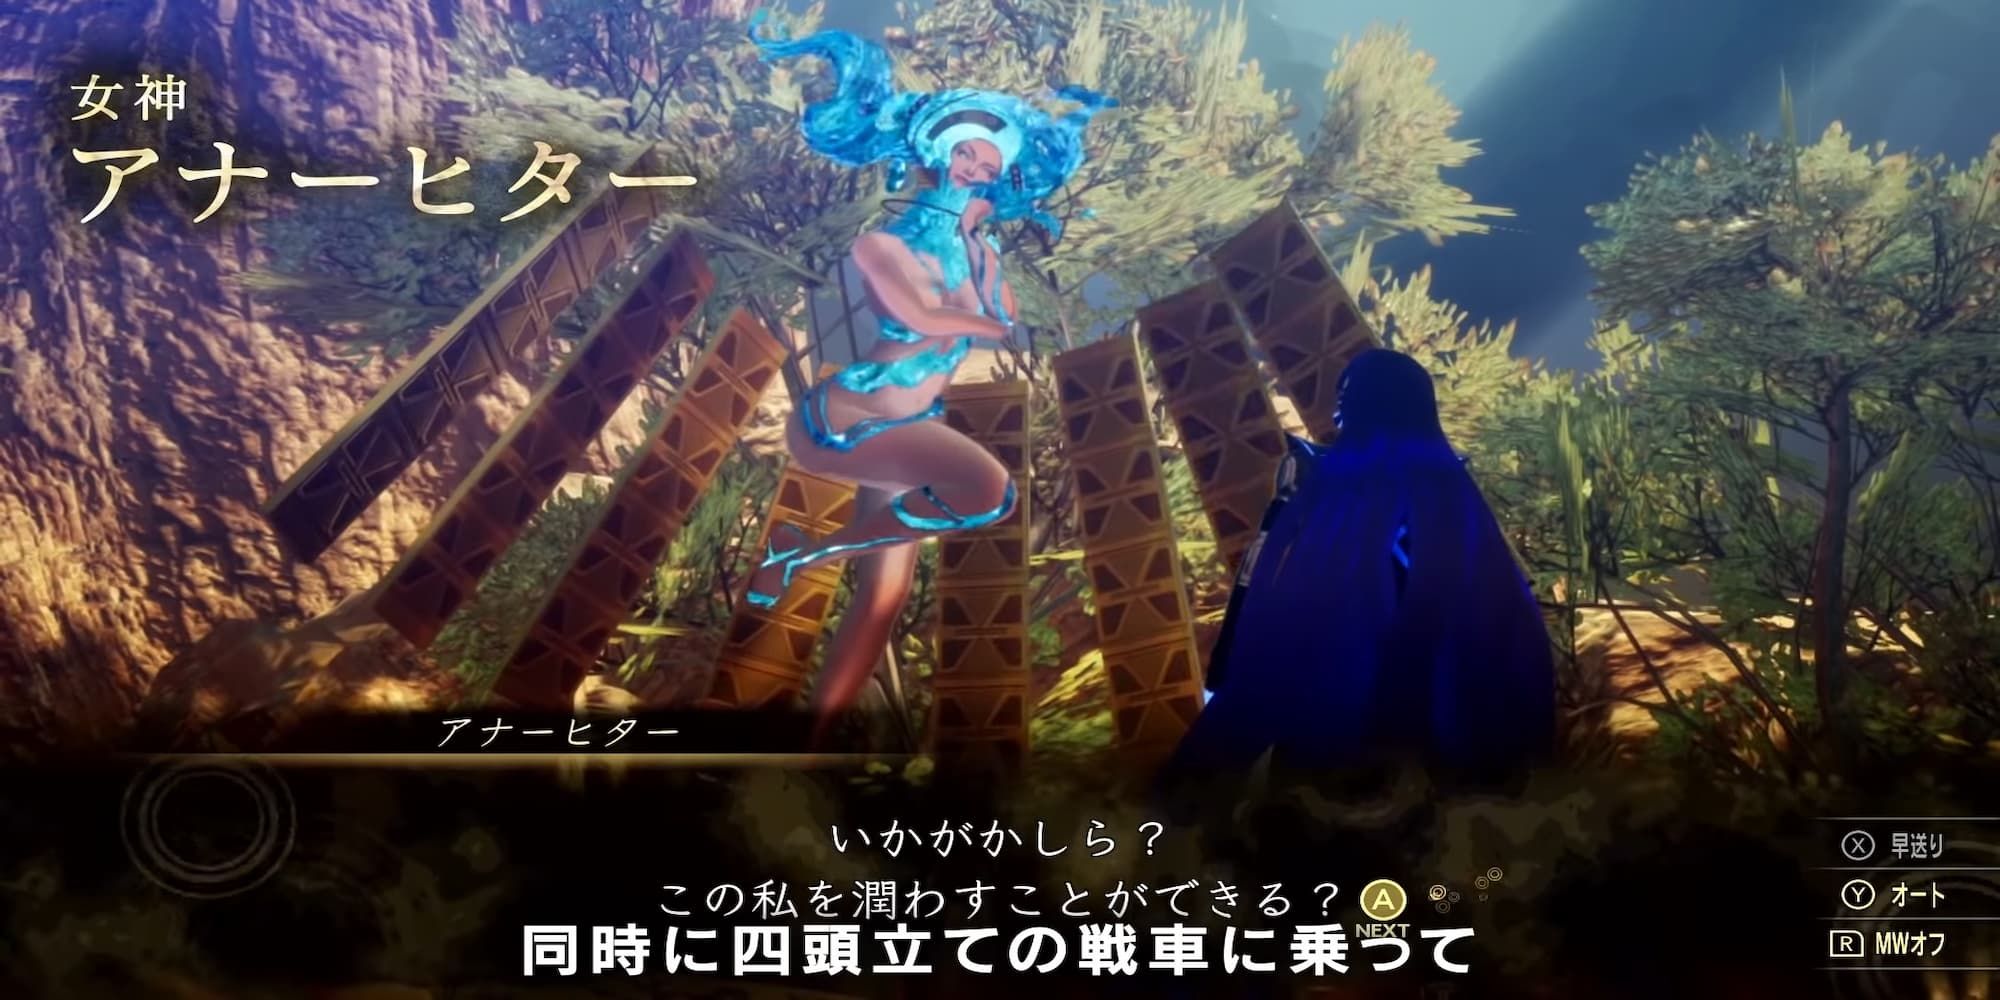 Shin Megami Tensei 5 Anahita blue water haired woman with blue water body floating in air shining gold plates behind her looking down at protagonist